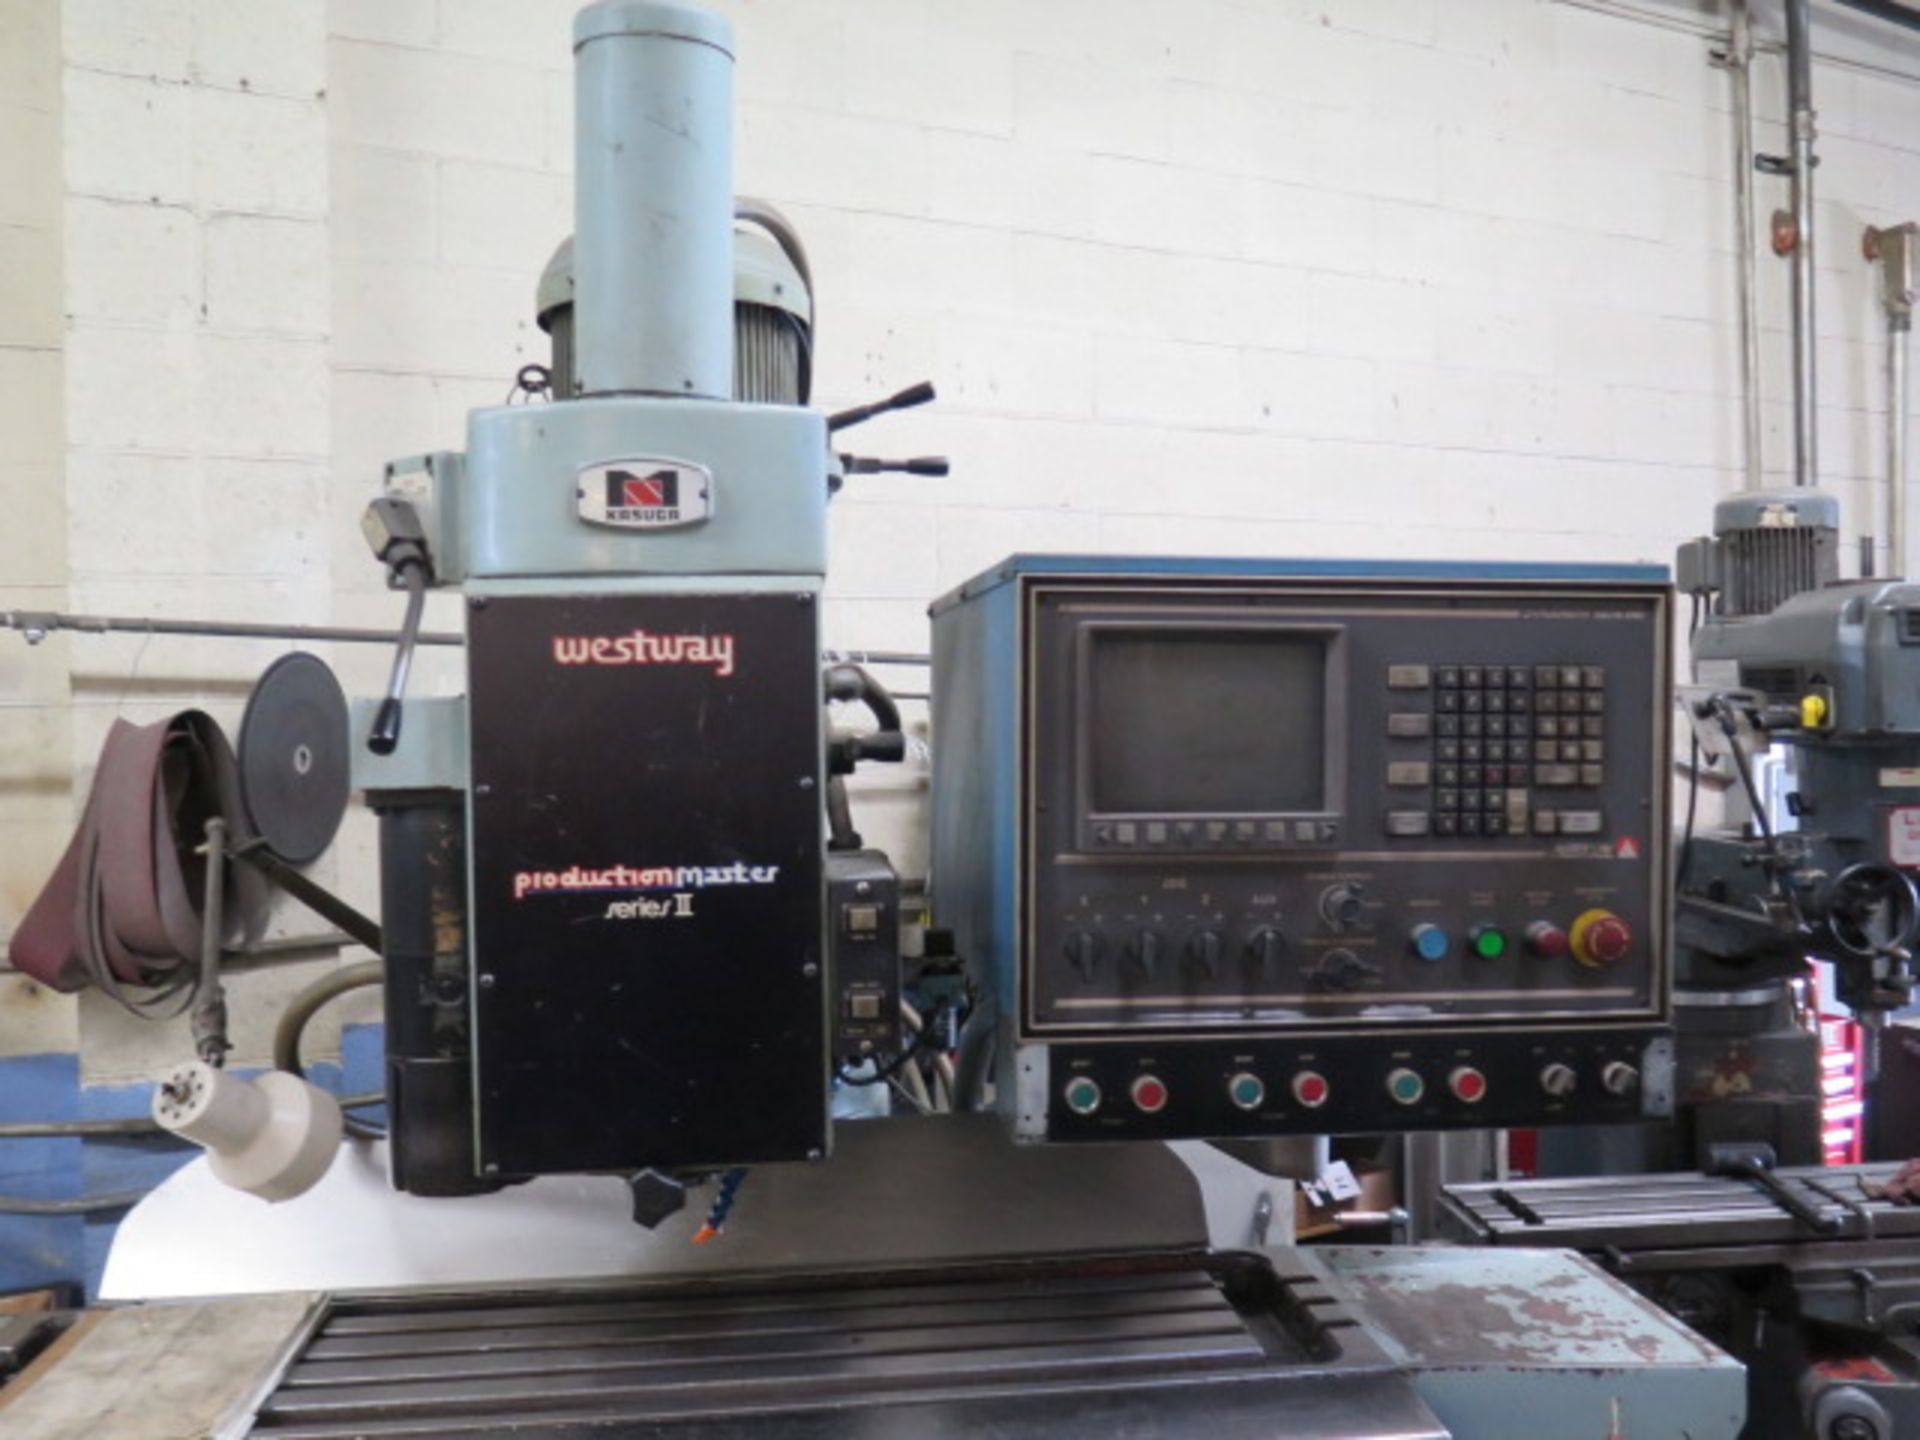 Kasuga V2 Westway Production Machinery Series II 3-Axis CNC Vertical Mill s/n 4351 SOLD AS IS - Image 4 of 13